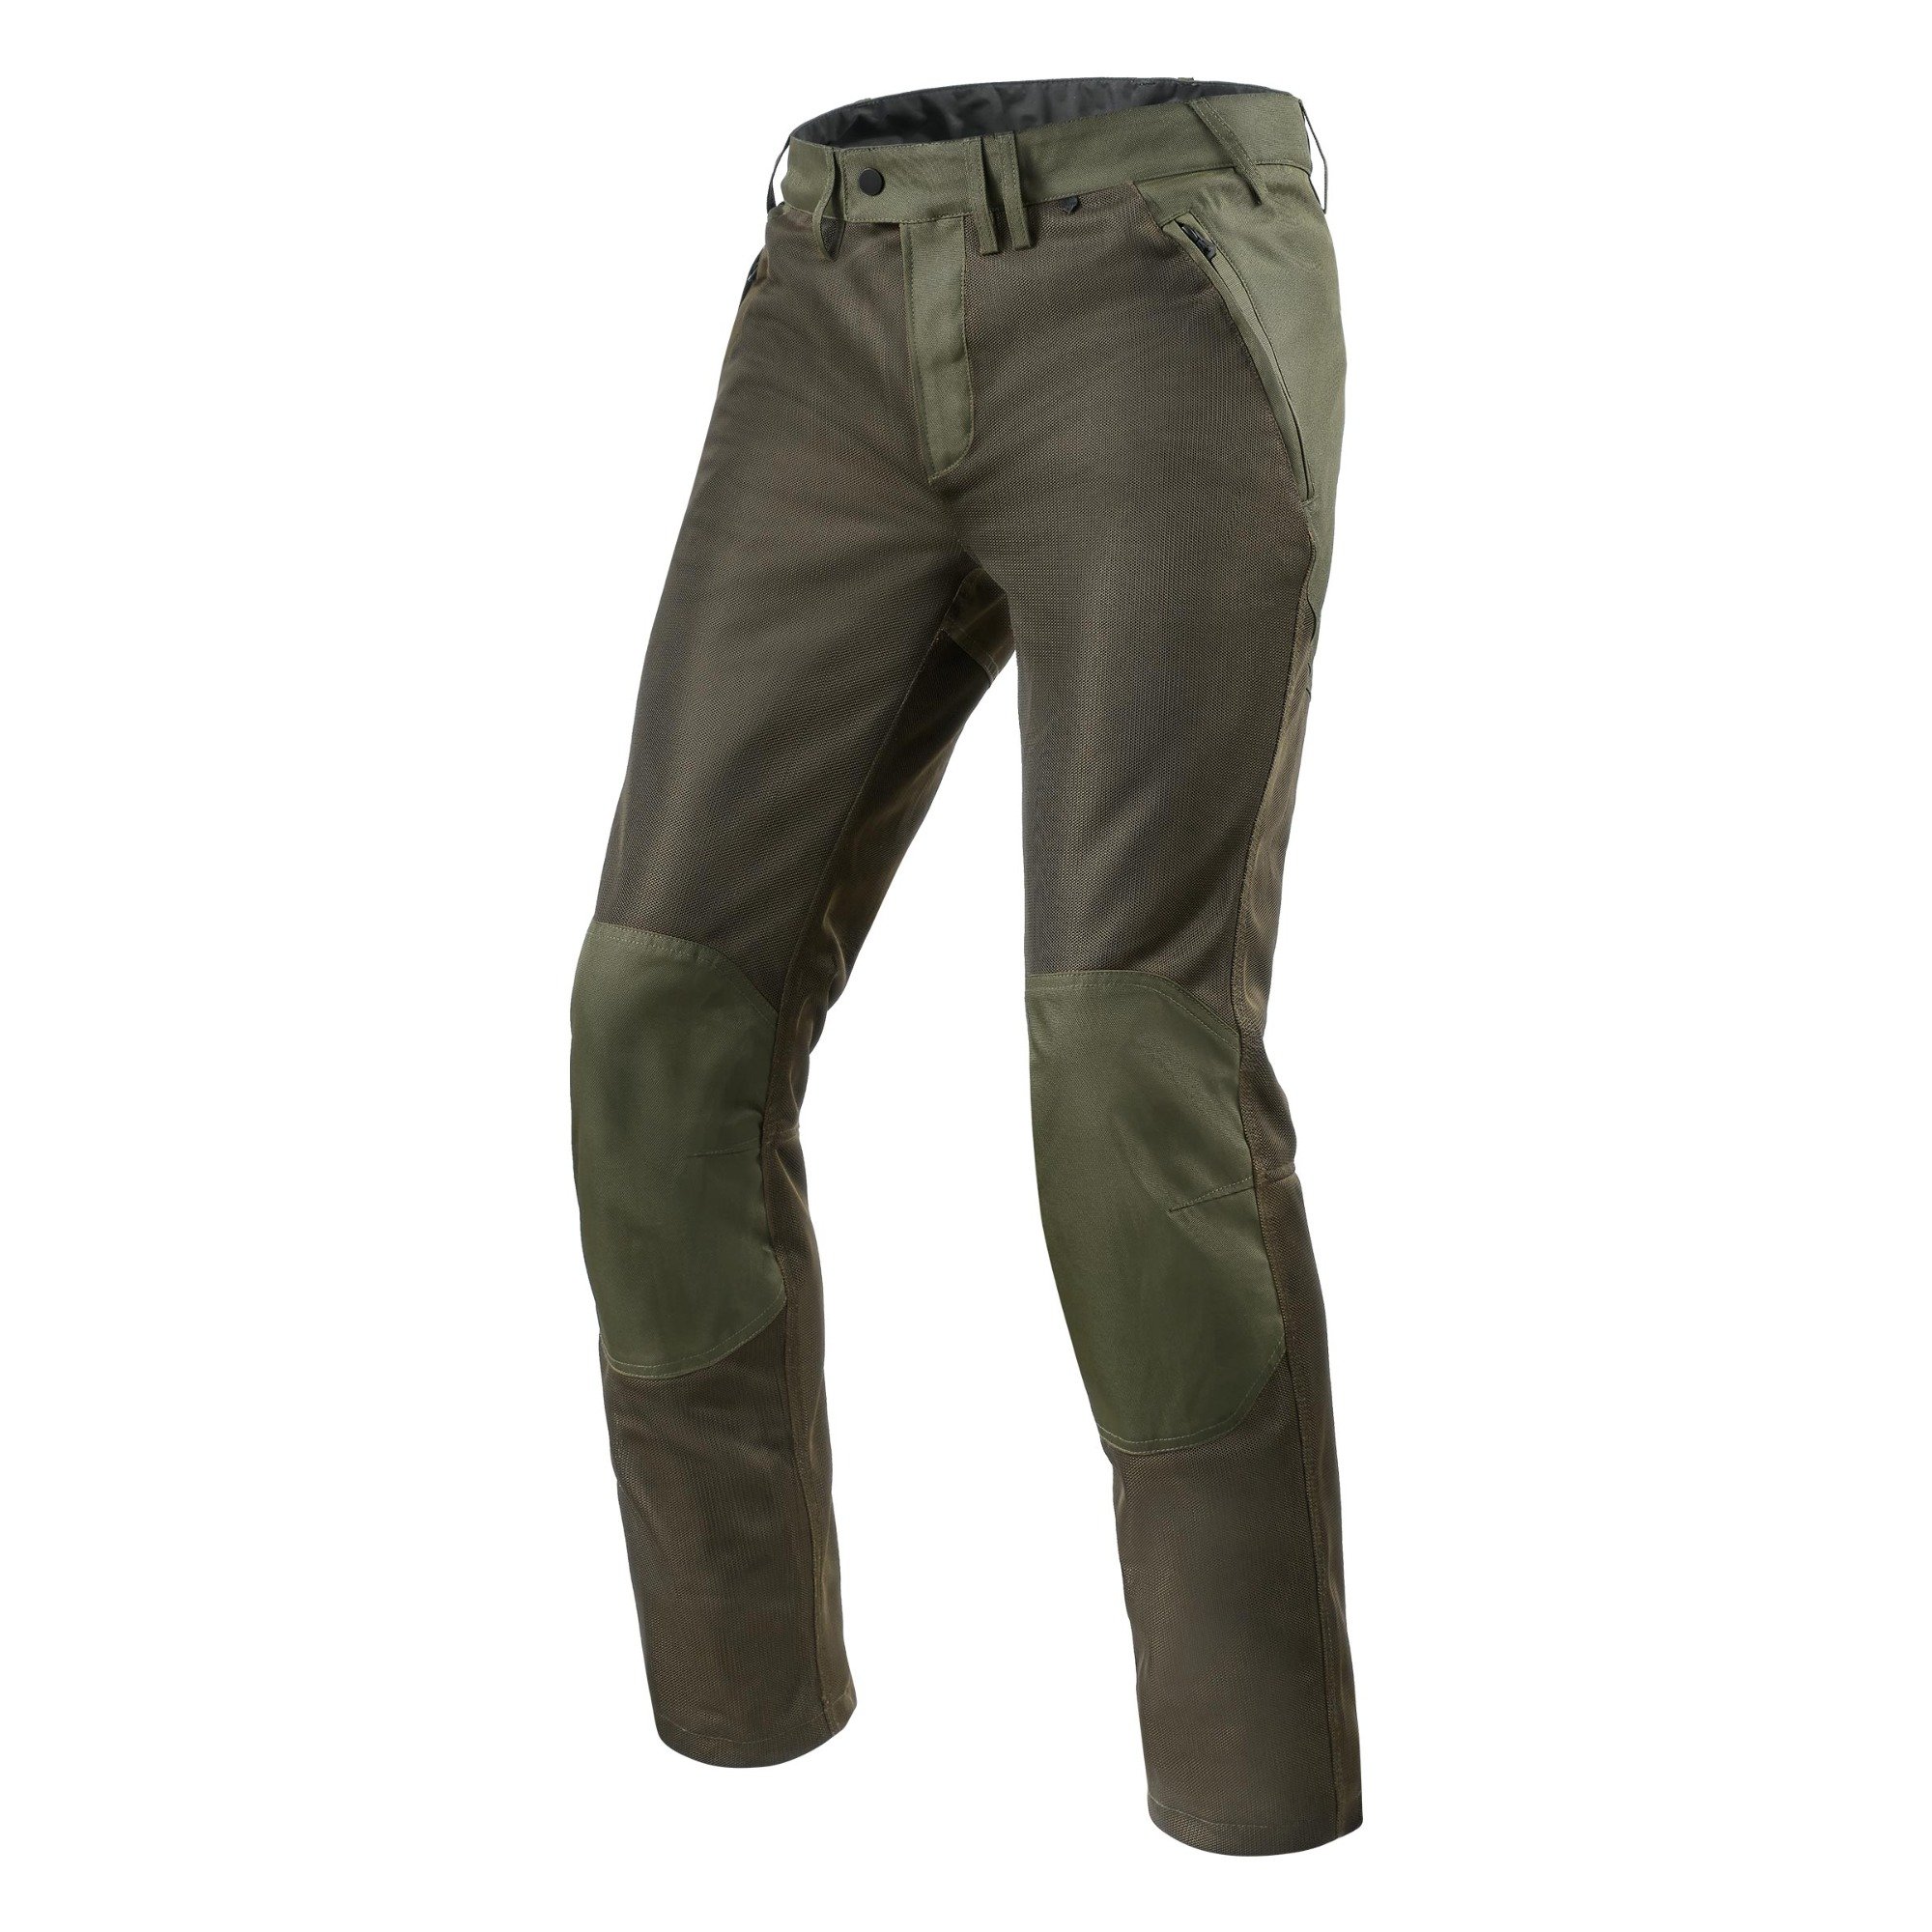 Image of REV'IT! Trousers Eclipse Dark Green Short Size 3XL ID 8700001335034